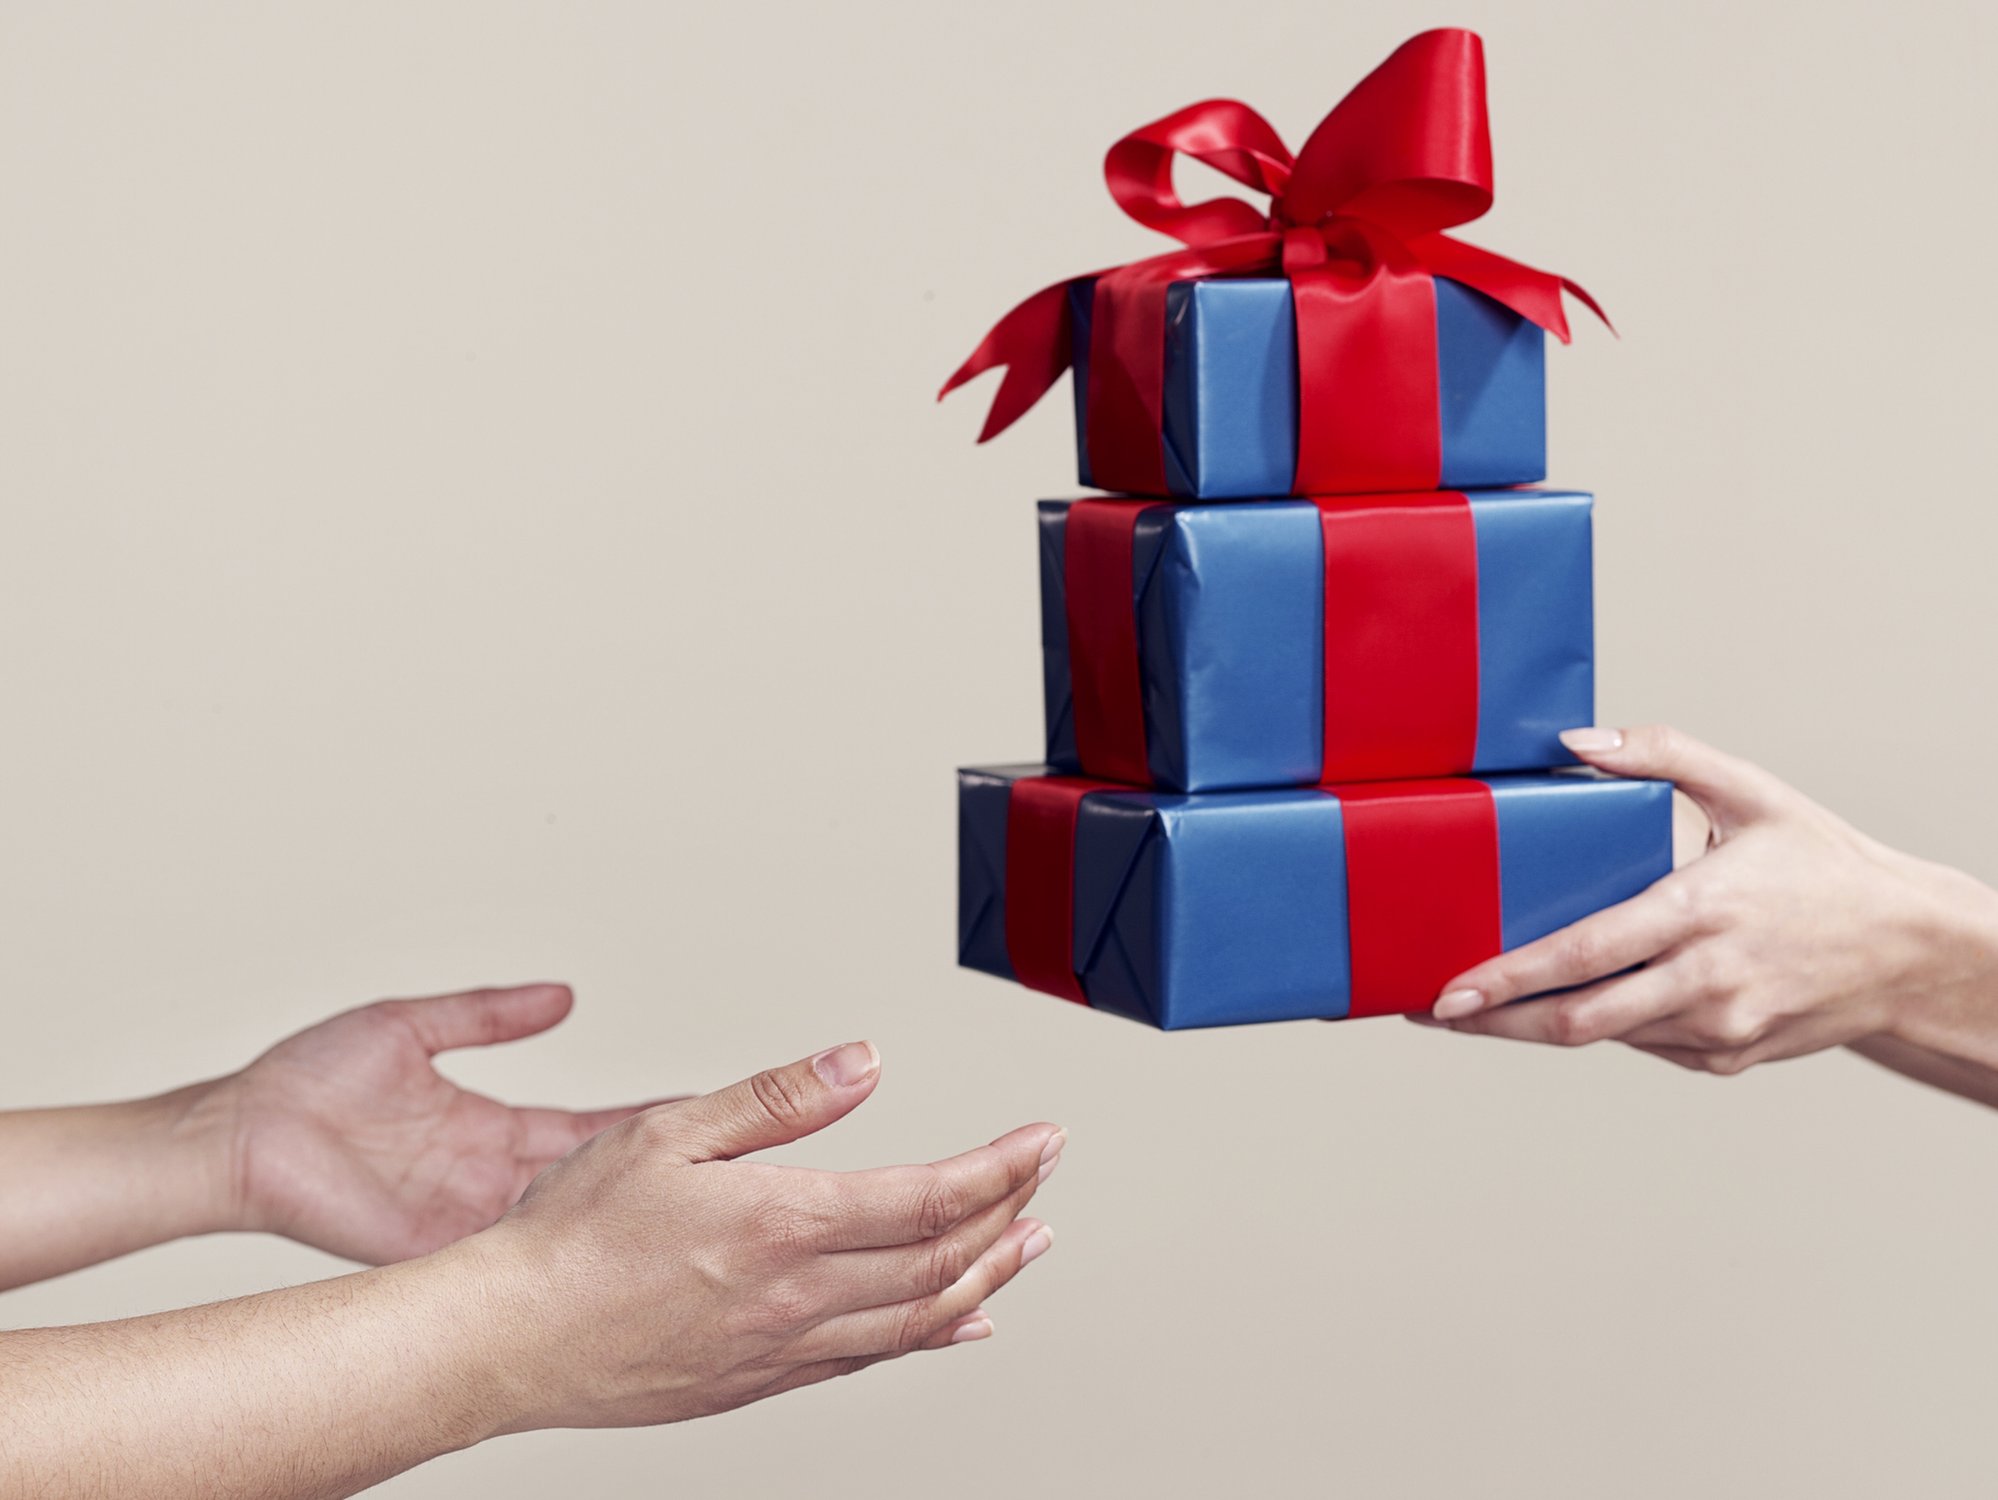 One pair of hands offers presents to another